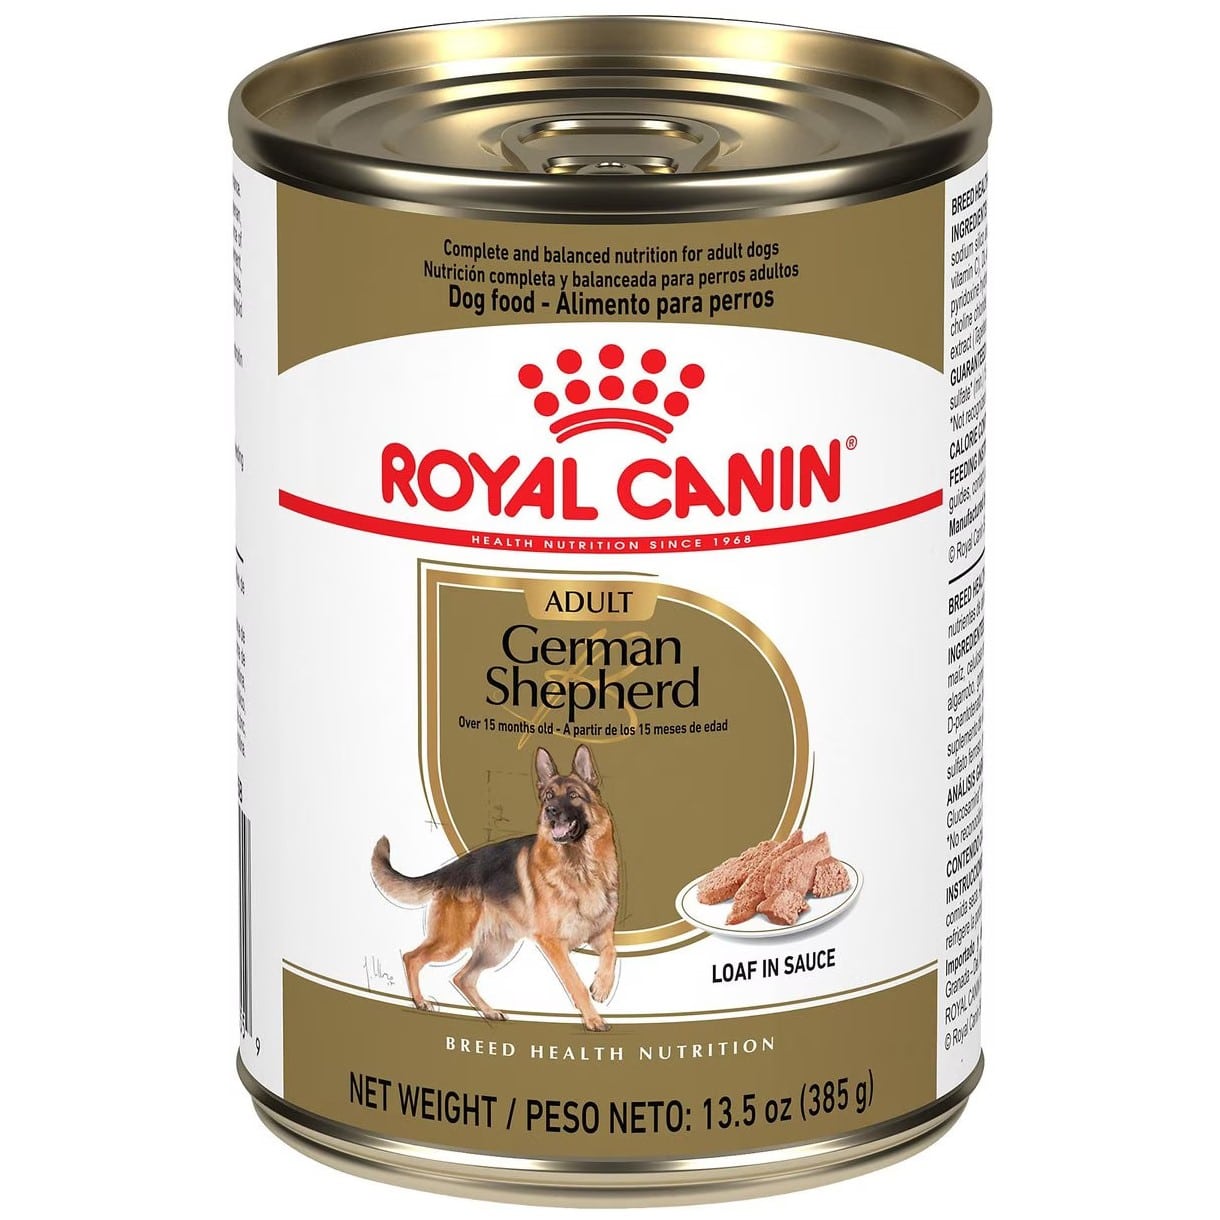 Royal Canin Breed Health Nutrition German Shepherd Adult Loaf in Sauce Canned Dog Food